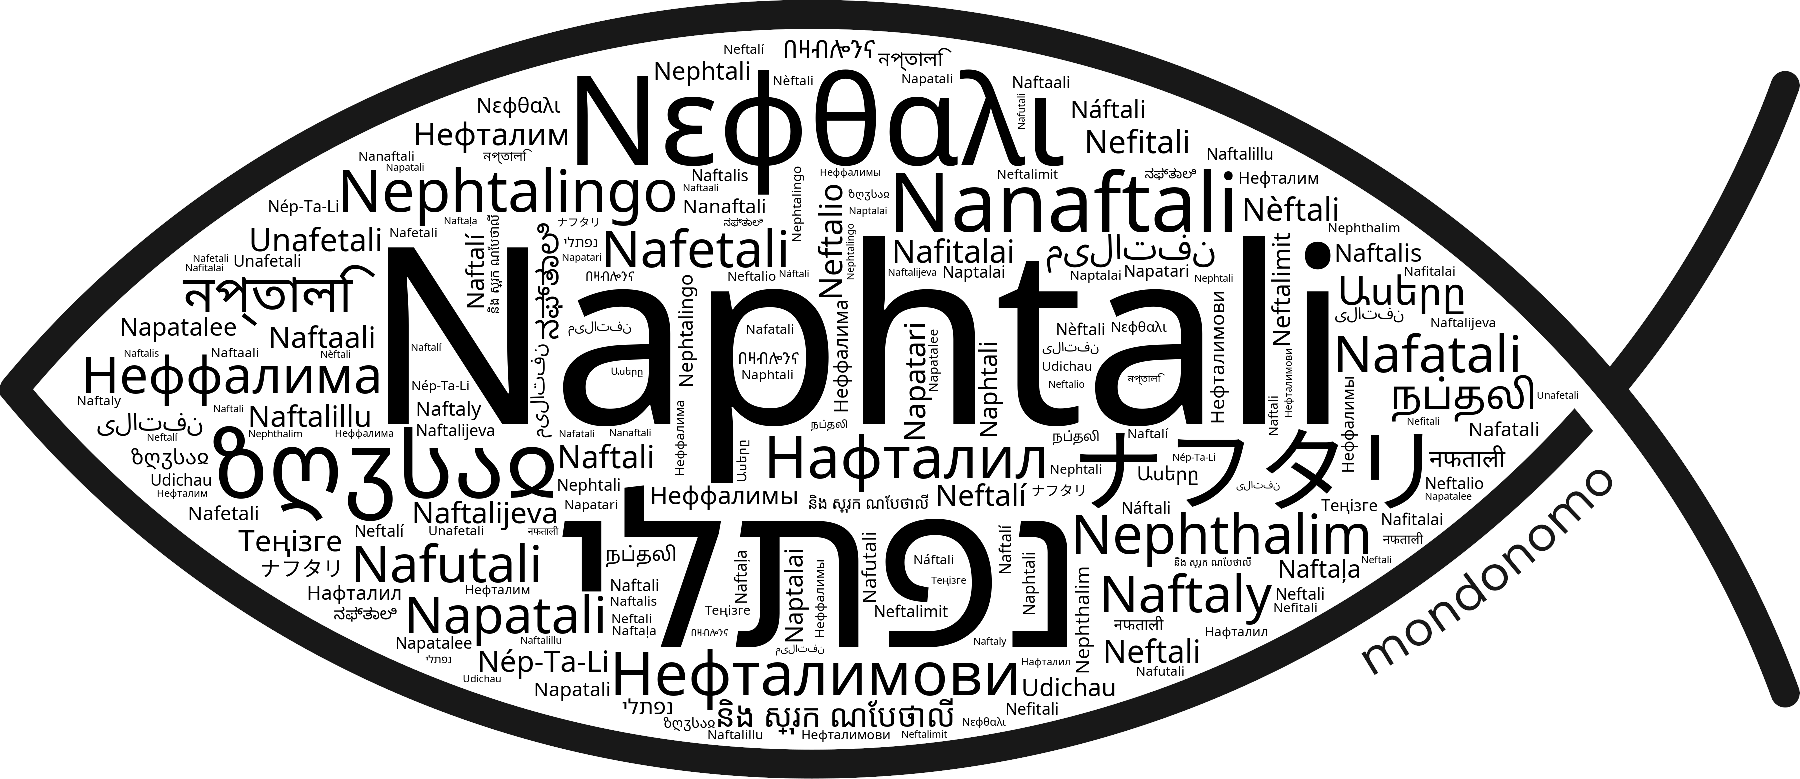 Name Naphtali in the world's Bibles